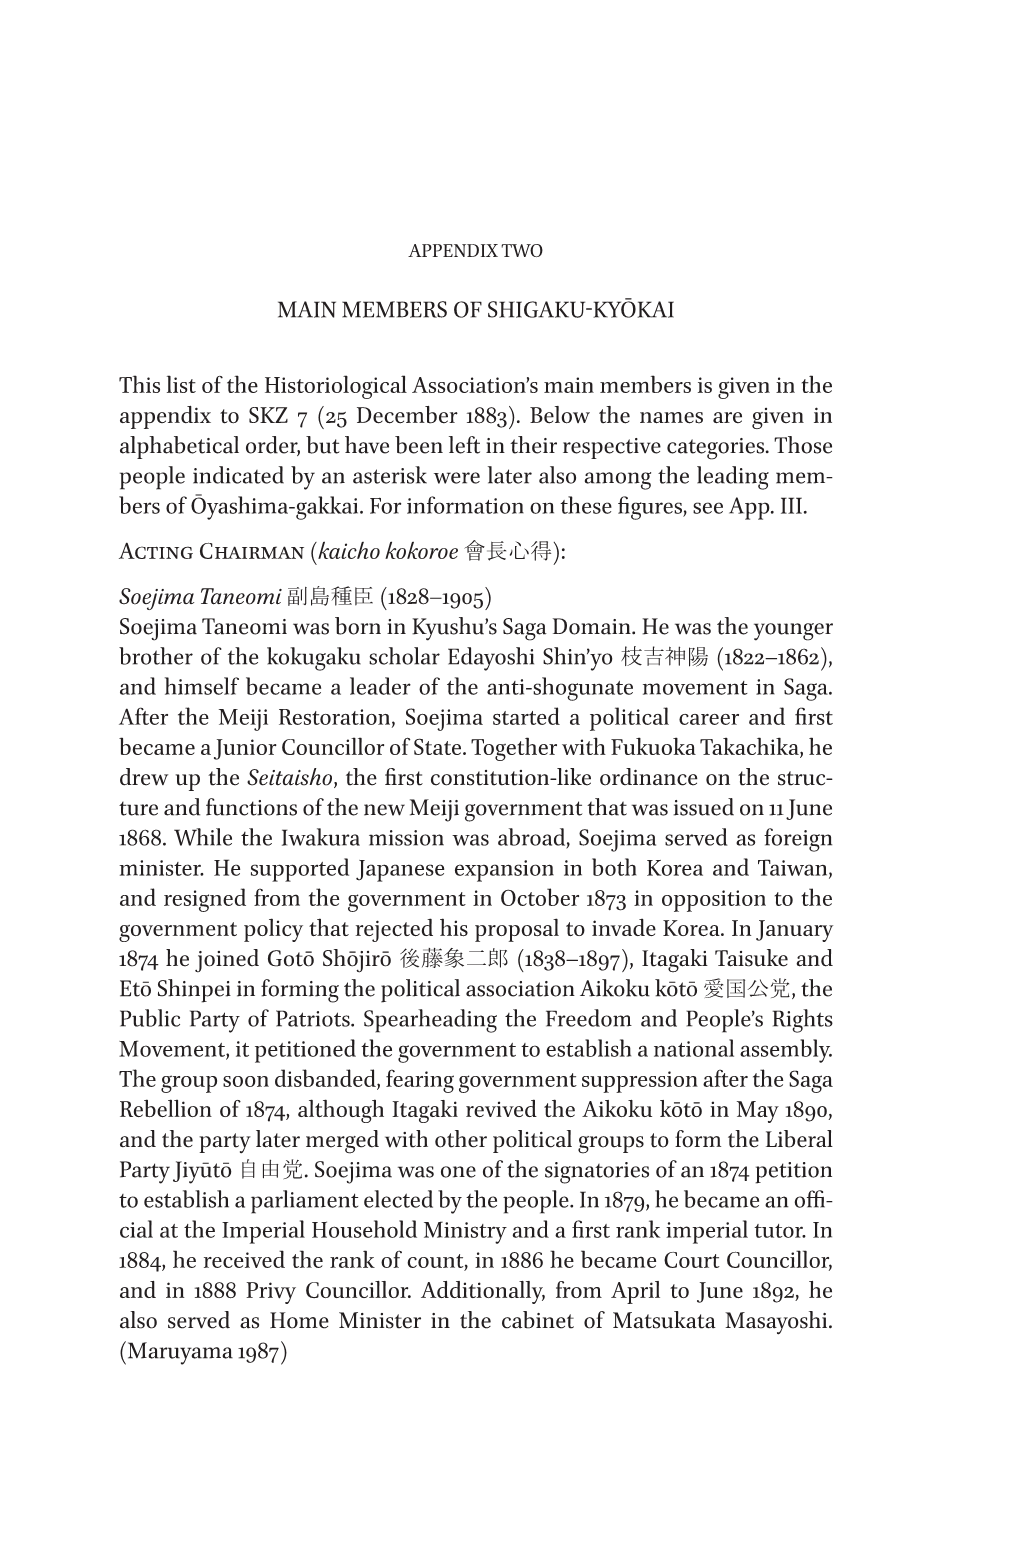 MEMBERS of SHIGAKU-KYŌKAI This List of the Historiological Association's Main Members Is Given in the Appendix to SKZ 7